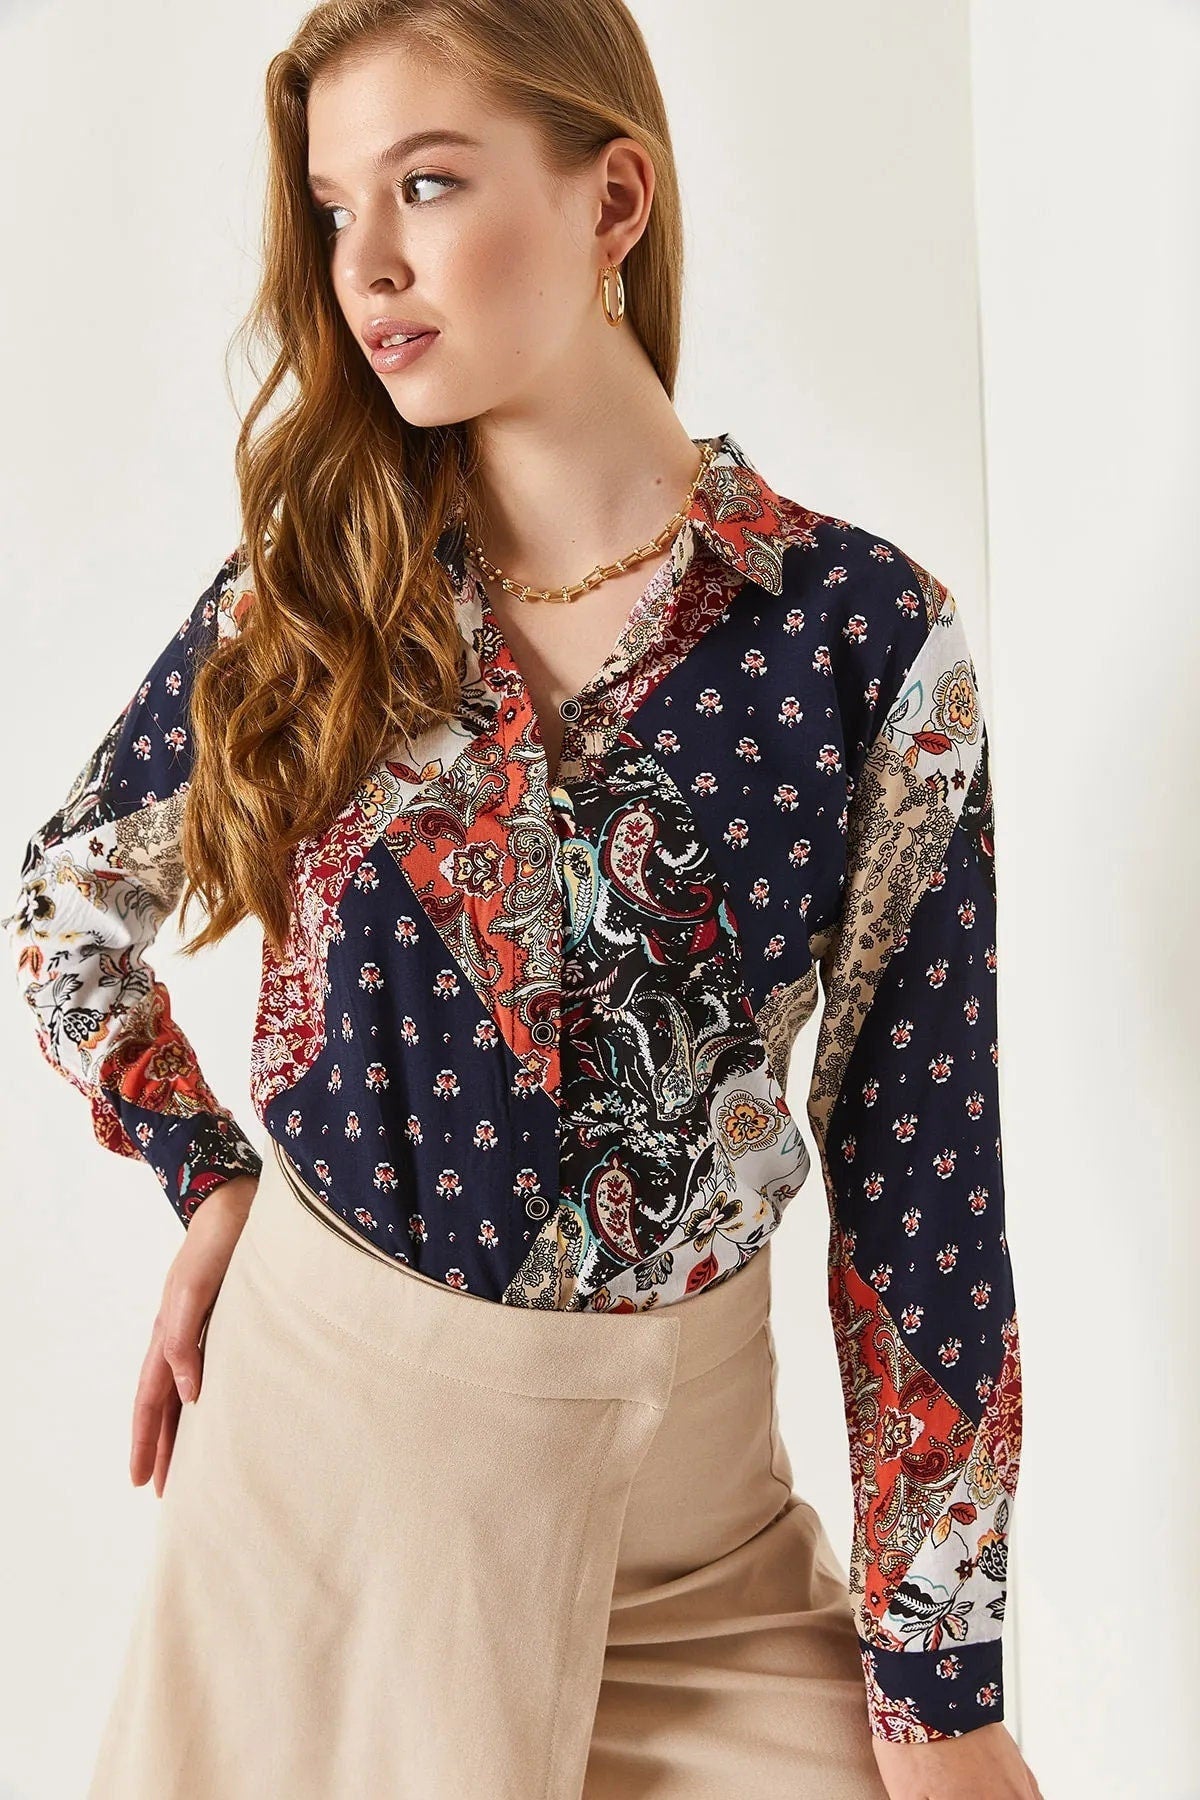 Navy Blue Patterned Long Sleeve Boho Woman Blouse,Business Woman Blouse,Paisley Pattern Blouse,Casual Blouse,Floral Pattern Womens Blouse